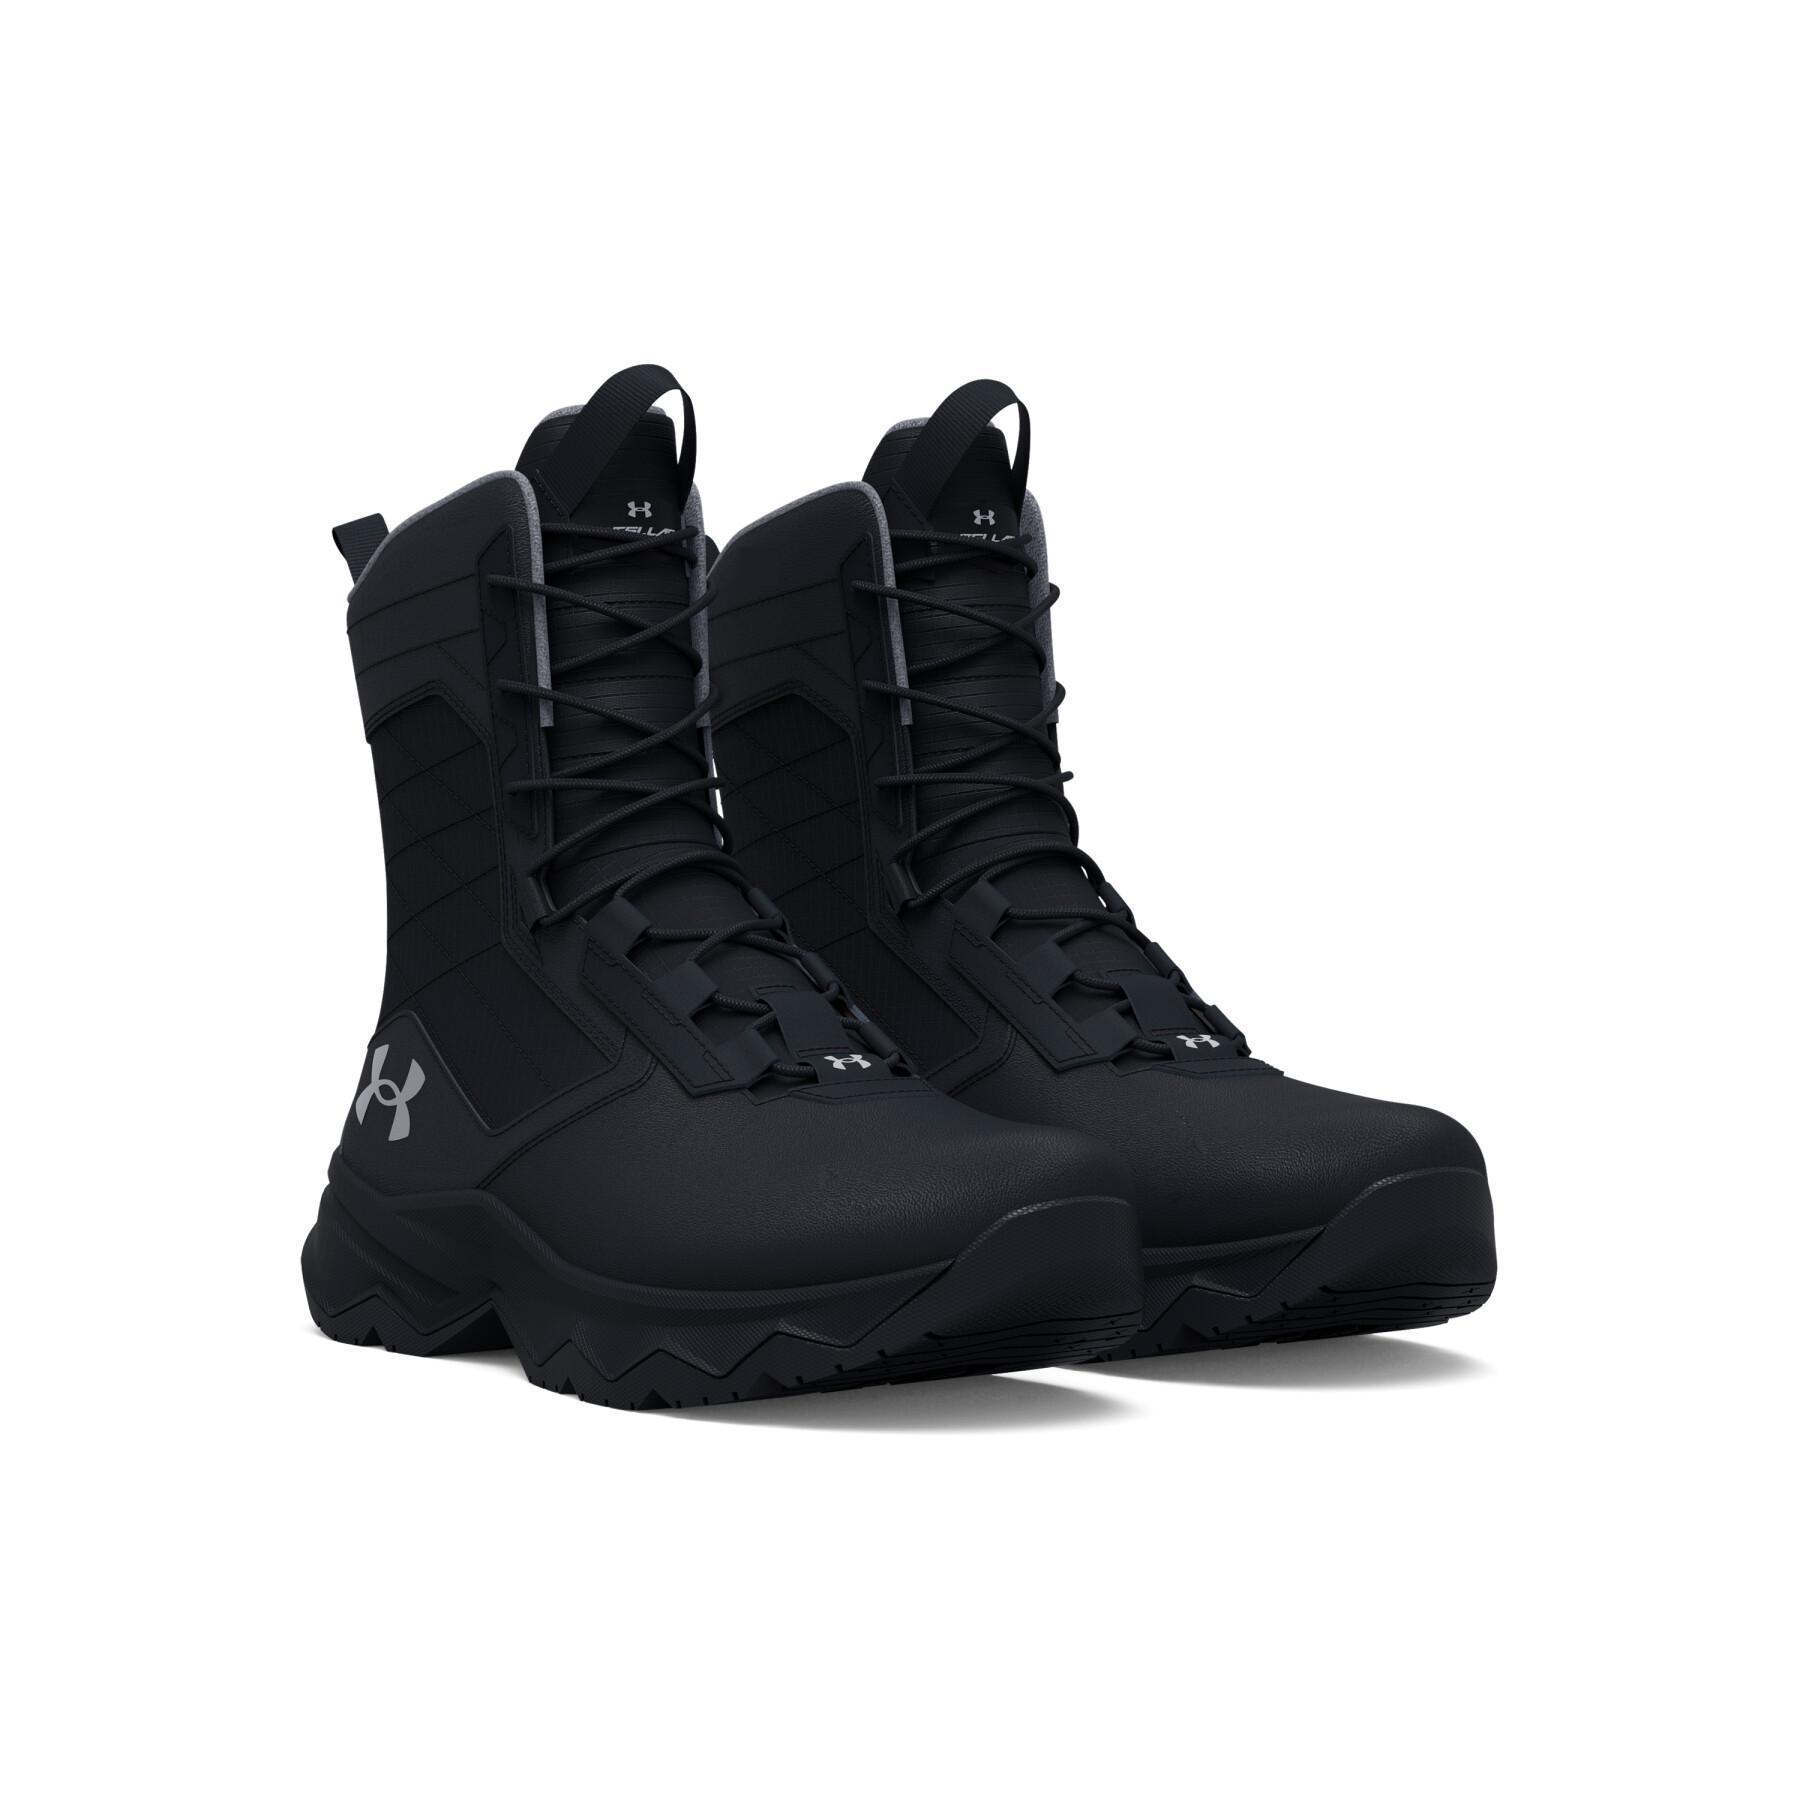 Hiking shoes Under Armour Stellar G2 Tactical